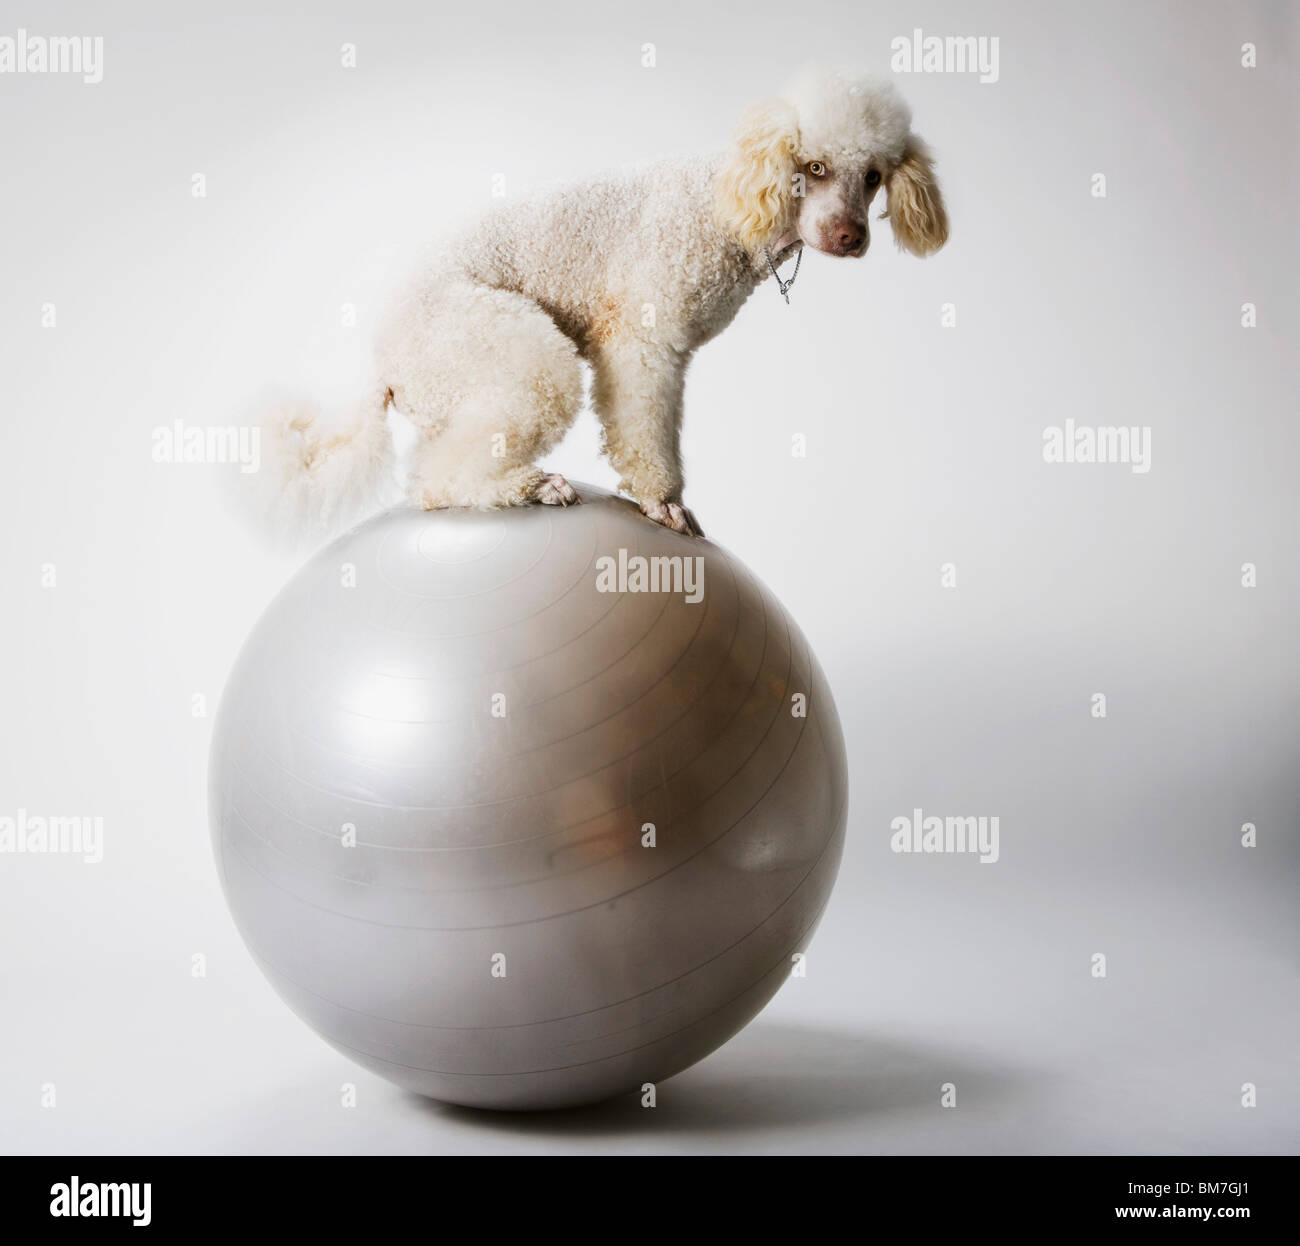 A Poodle standing on an exercise ball Stock Photo